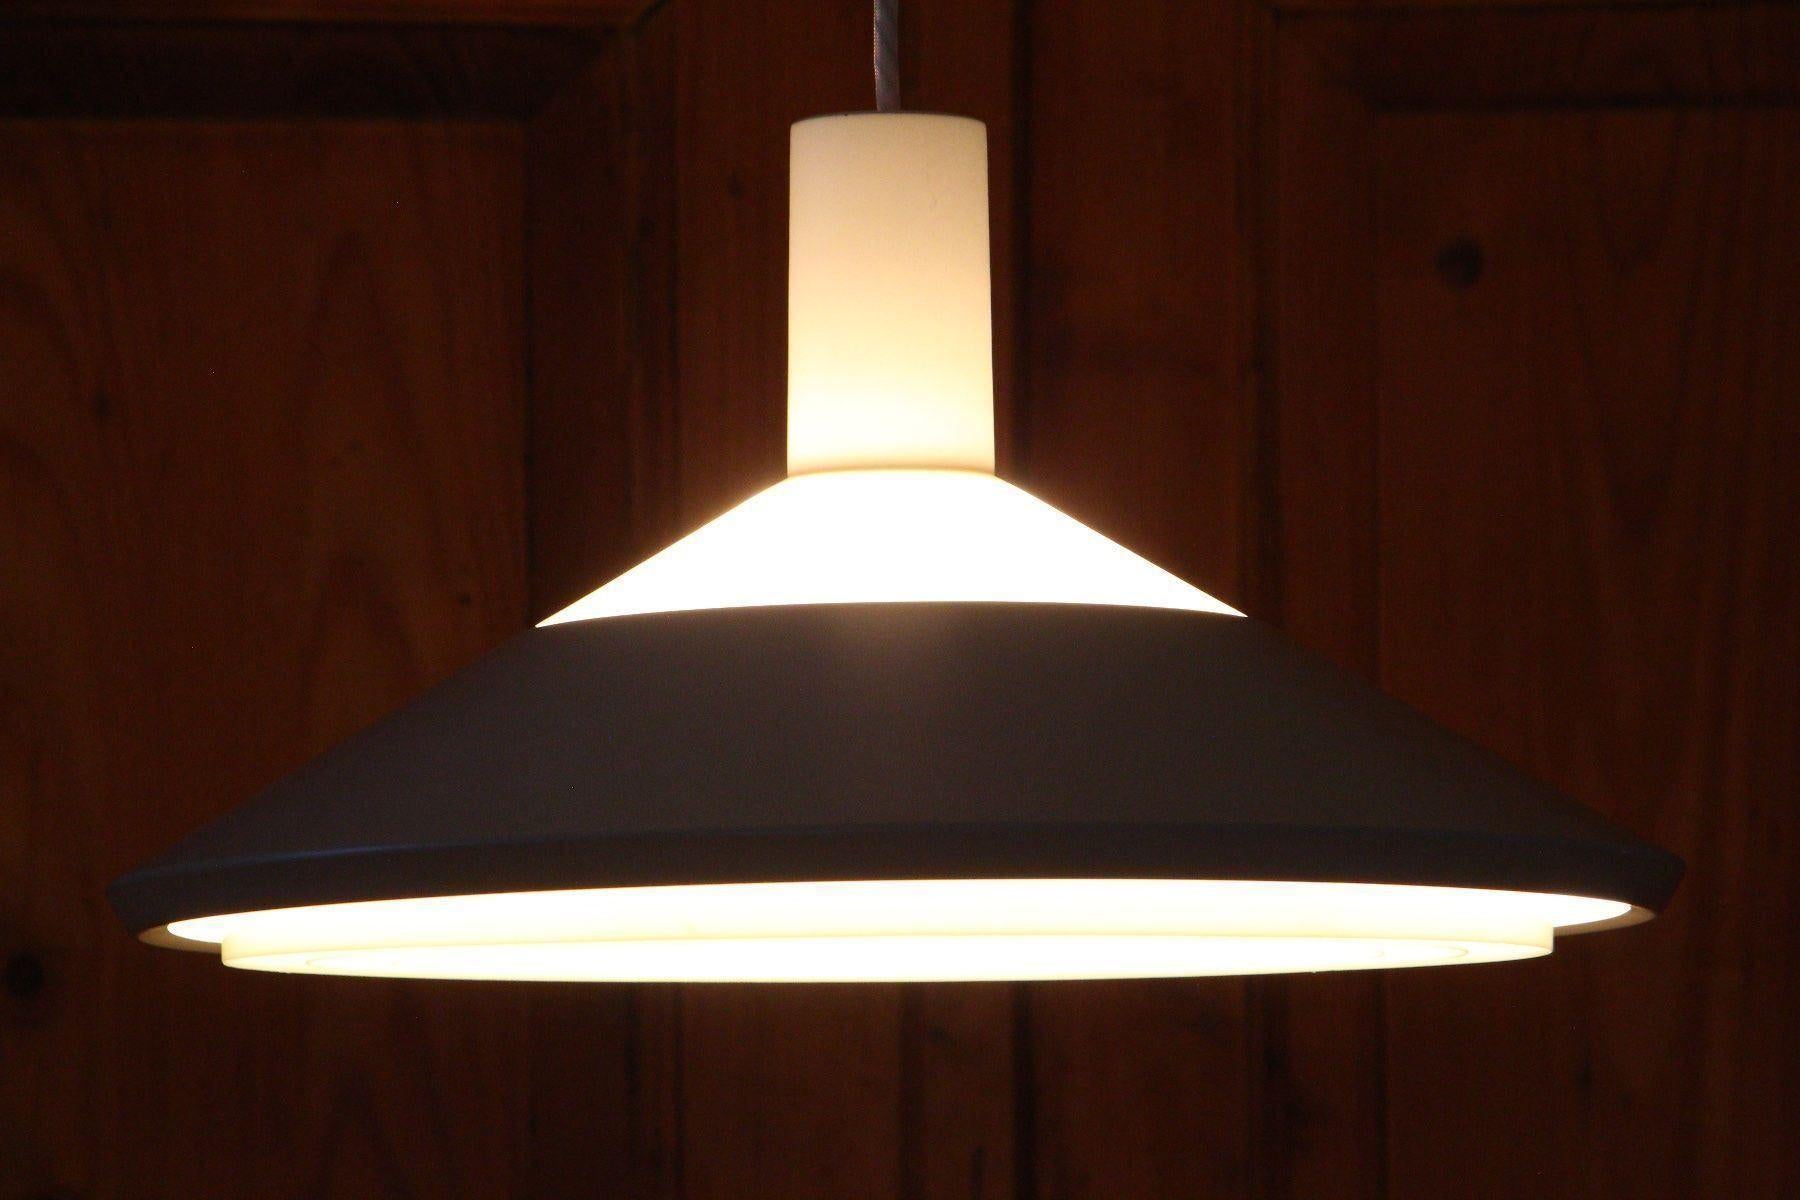 The good state of the lampe makes it unique. It seems new!
The decent colours (grey and white) and the sophisticated 2way lightening make this piece even more special.